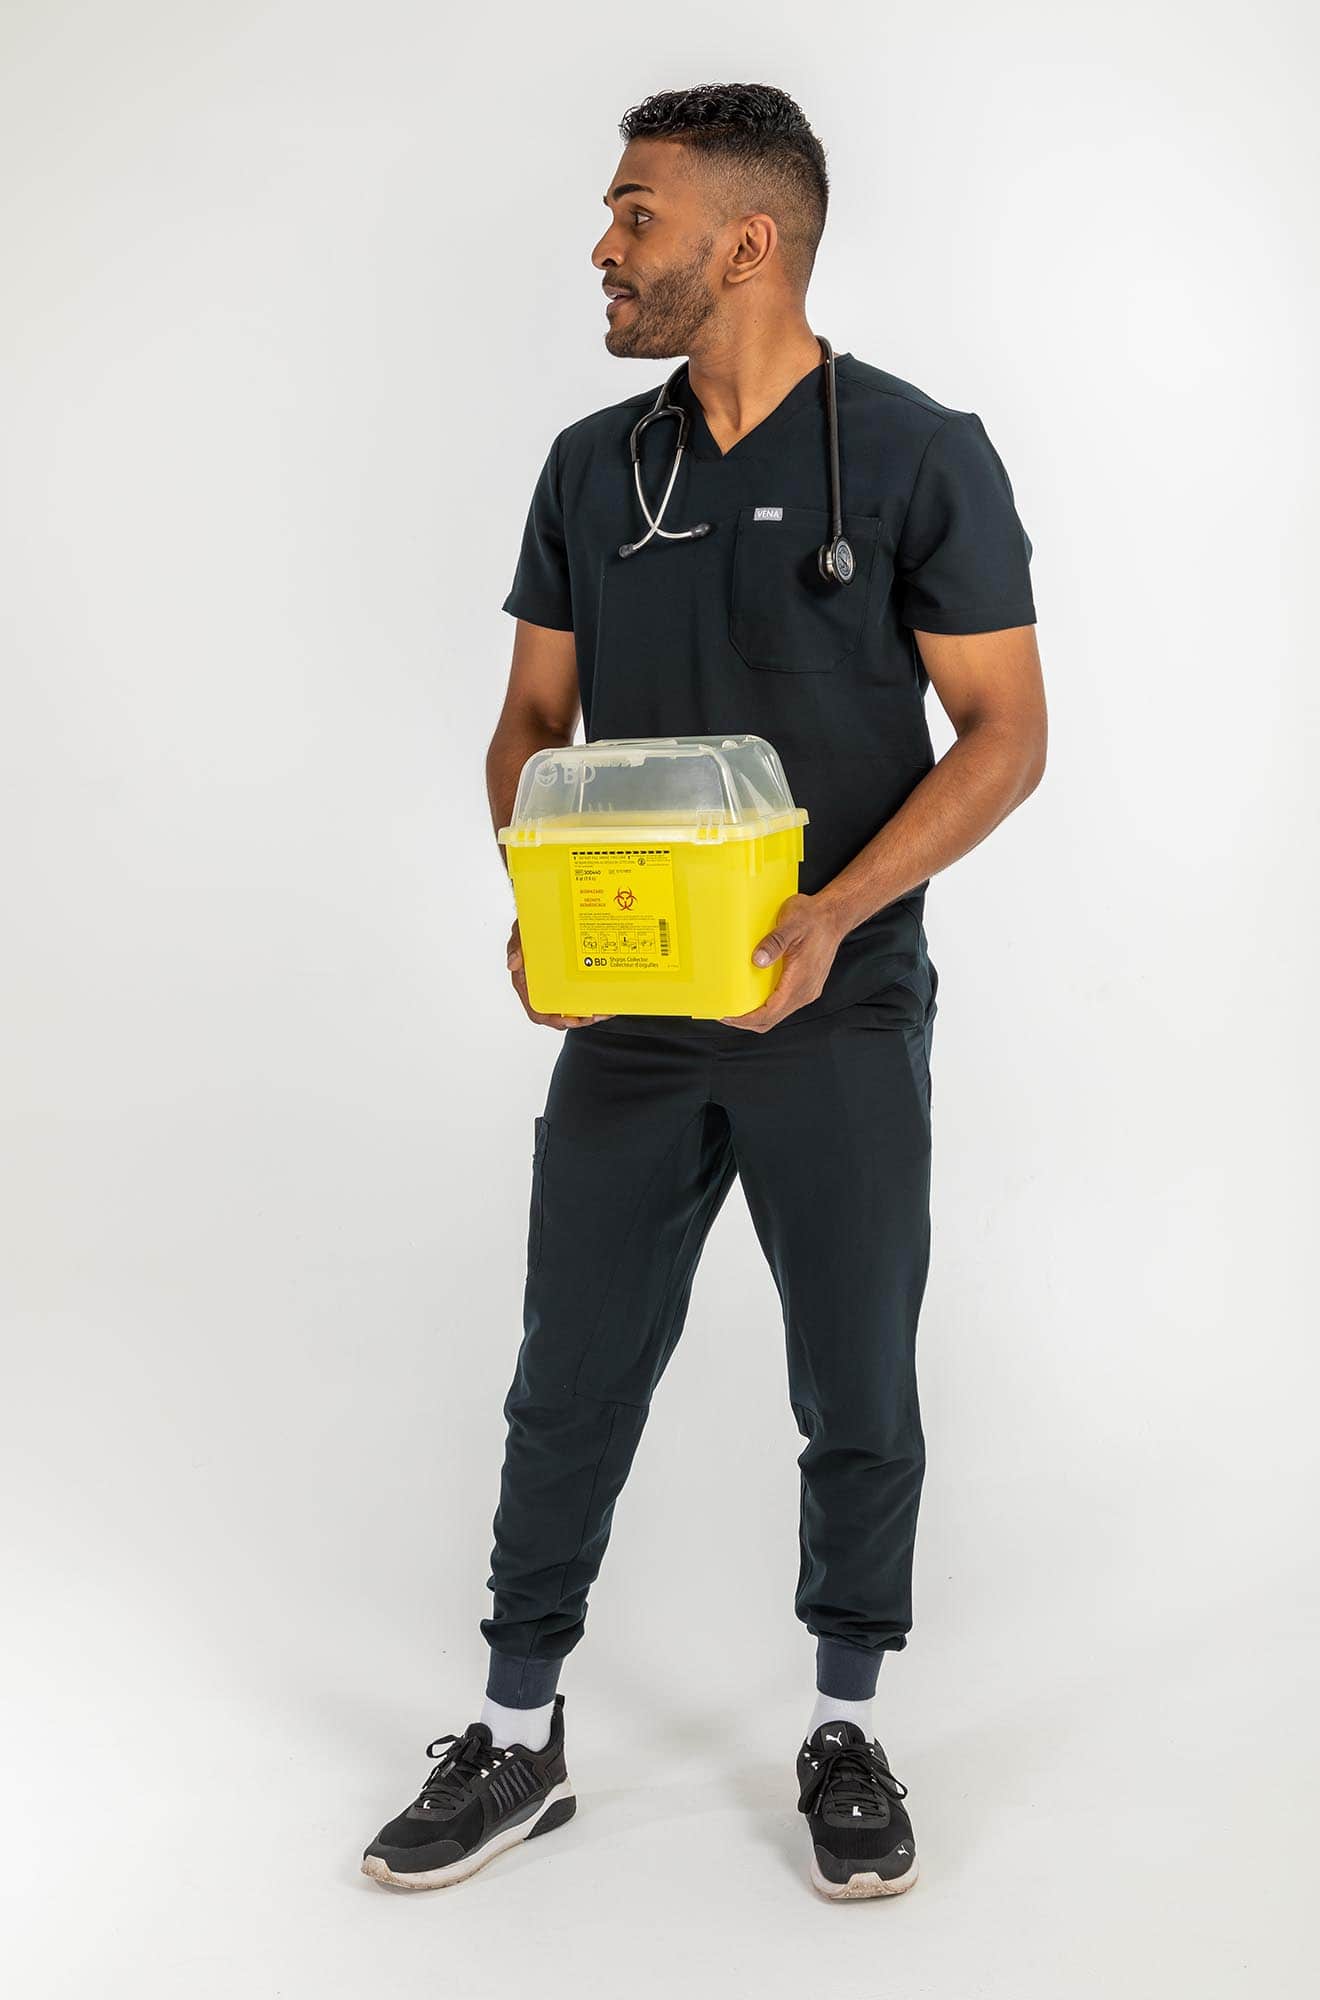 VENA mens jogger style scrub shirts, man holding yellow container#colour_black